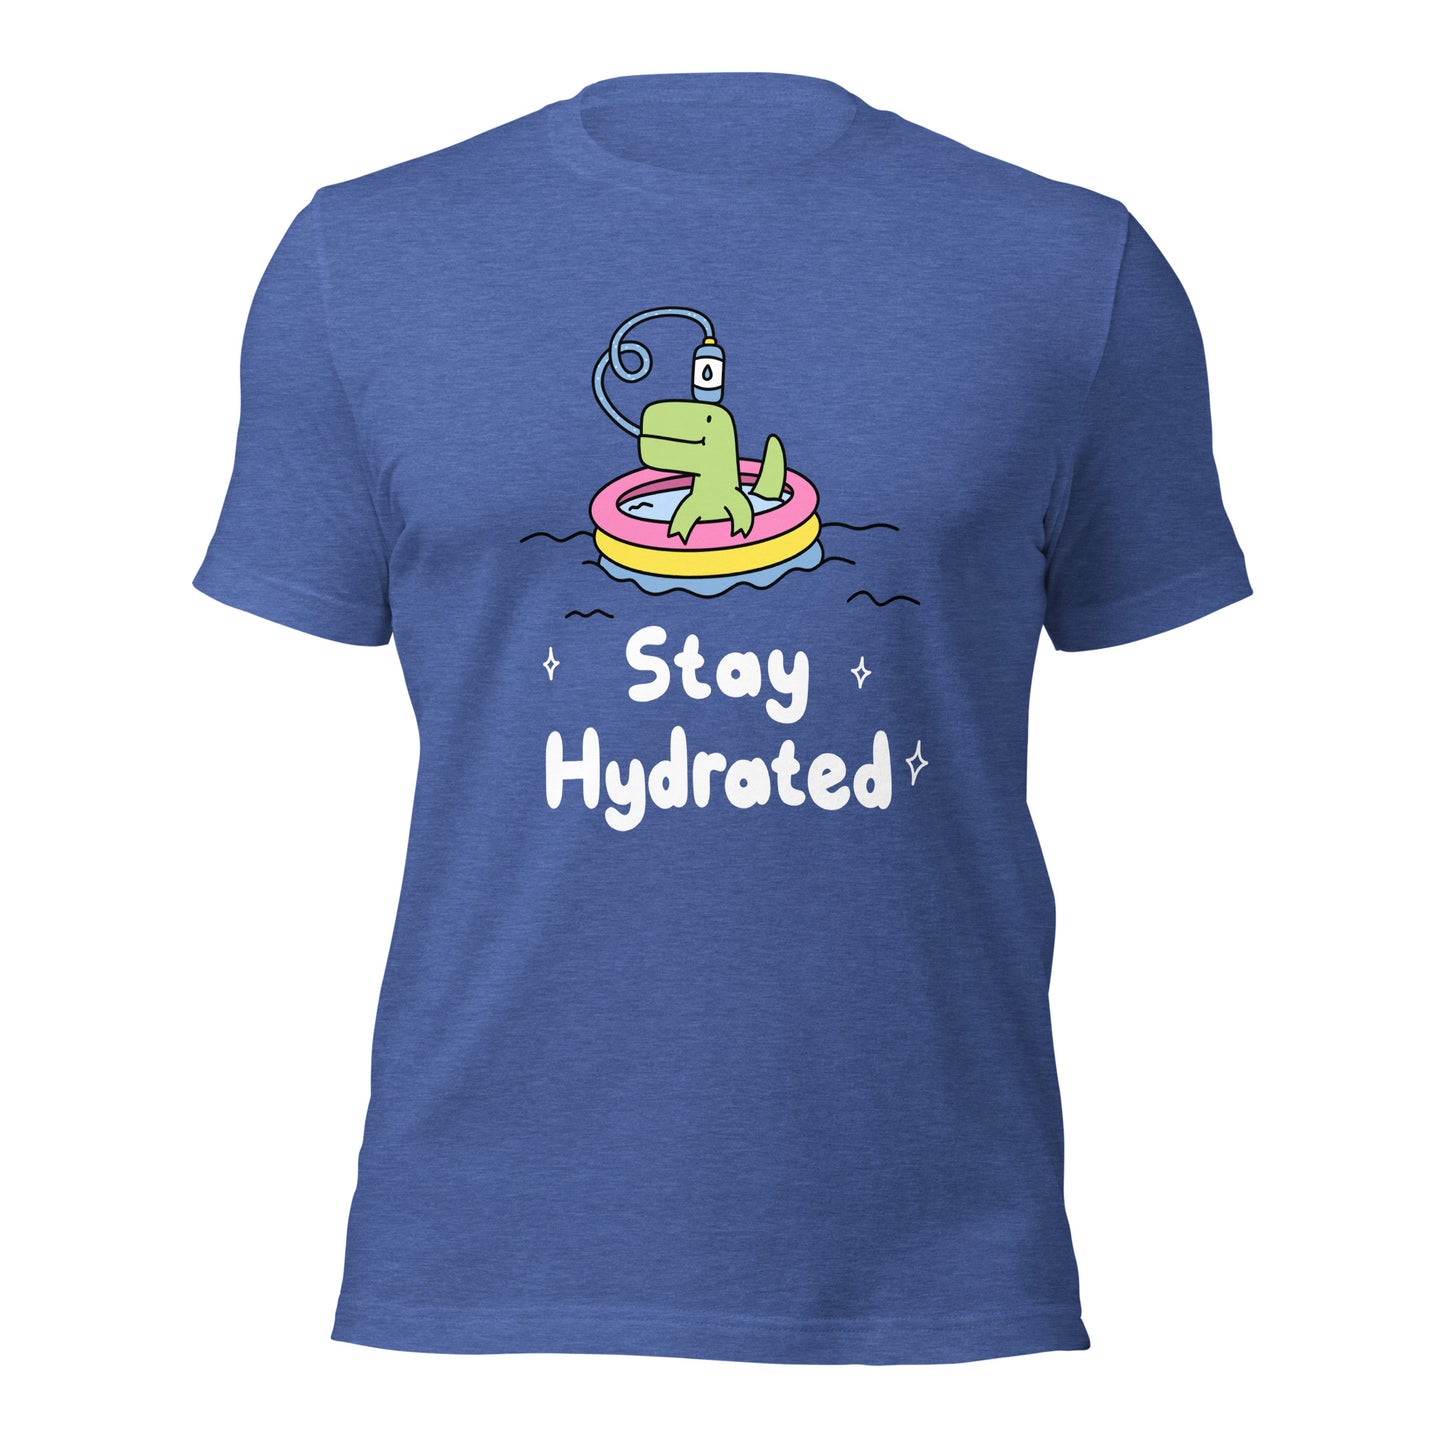 Stay Hydrated - Unisex T-Shirt